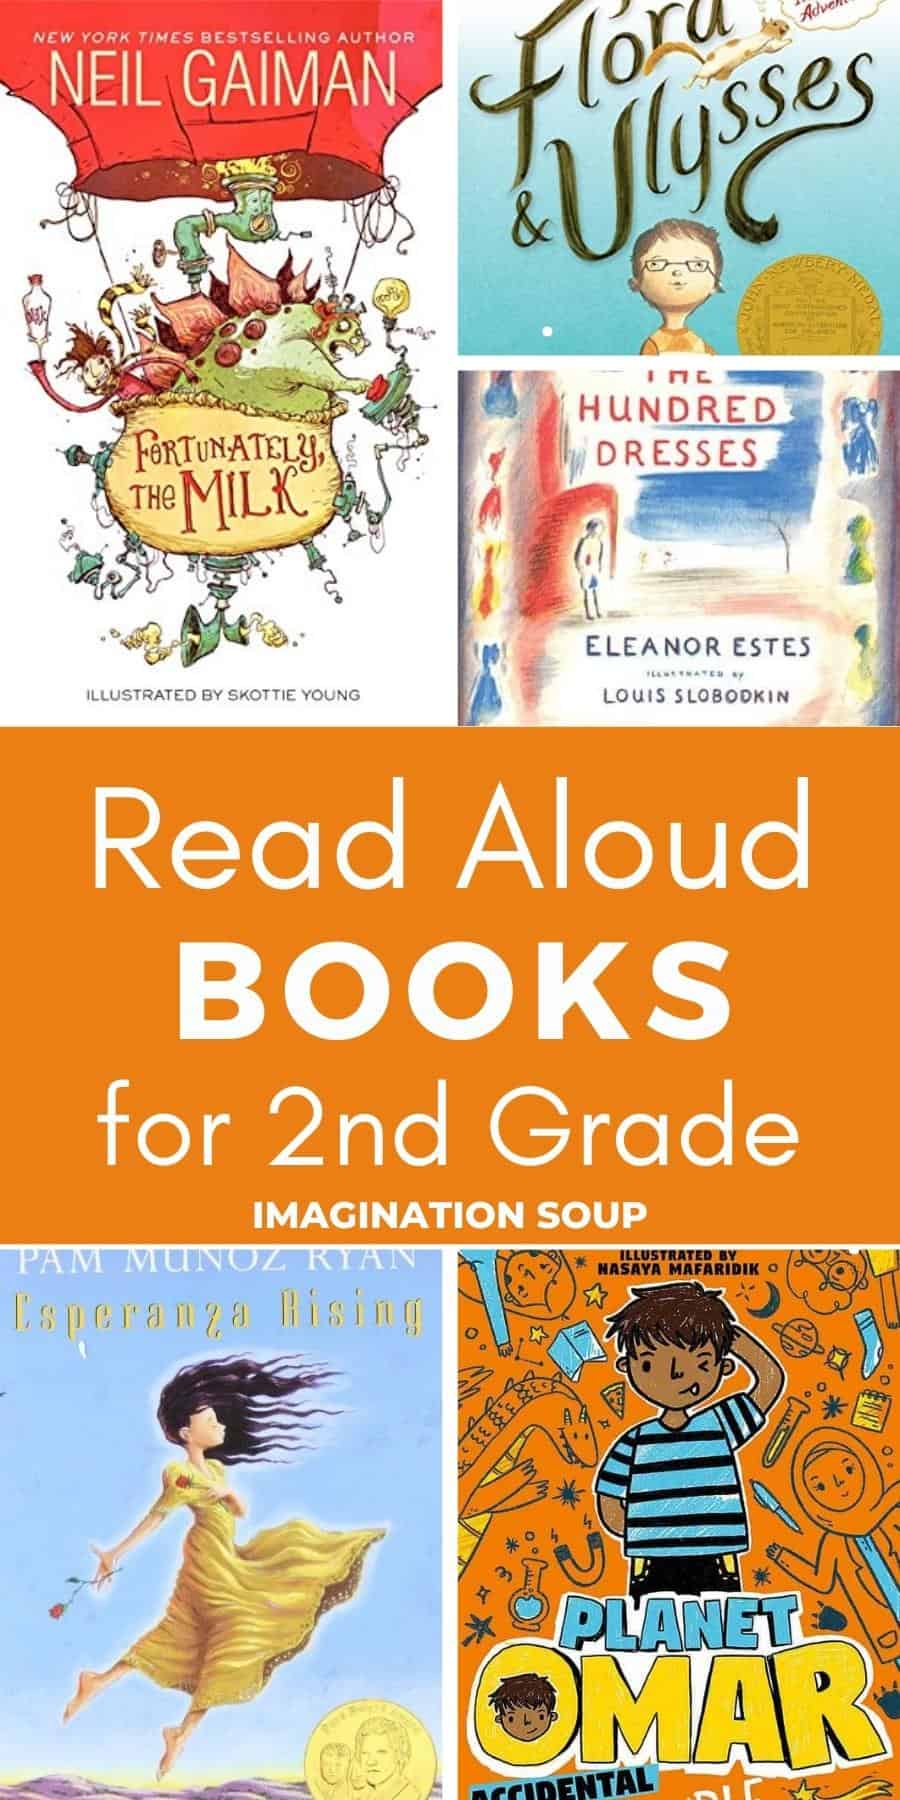 The best read aloud books for 2nd grade